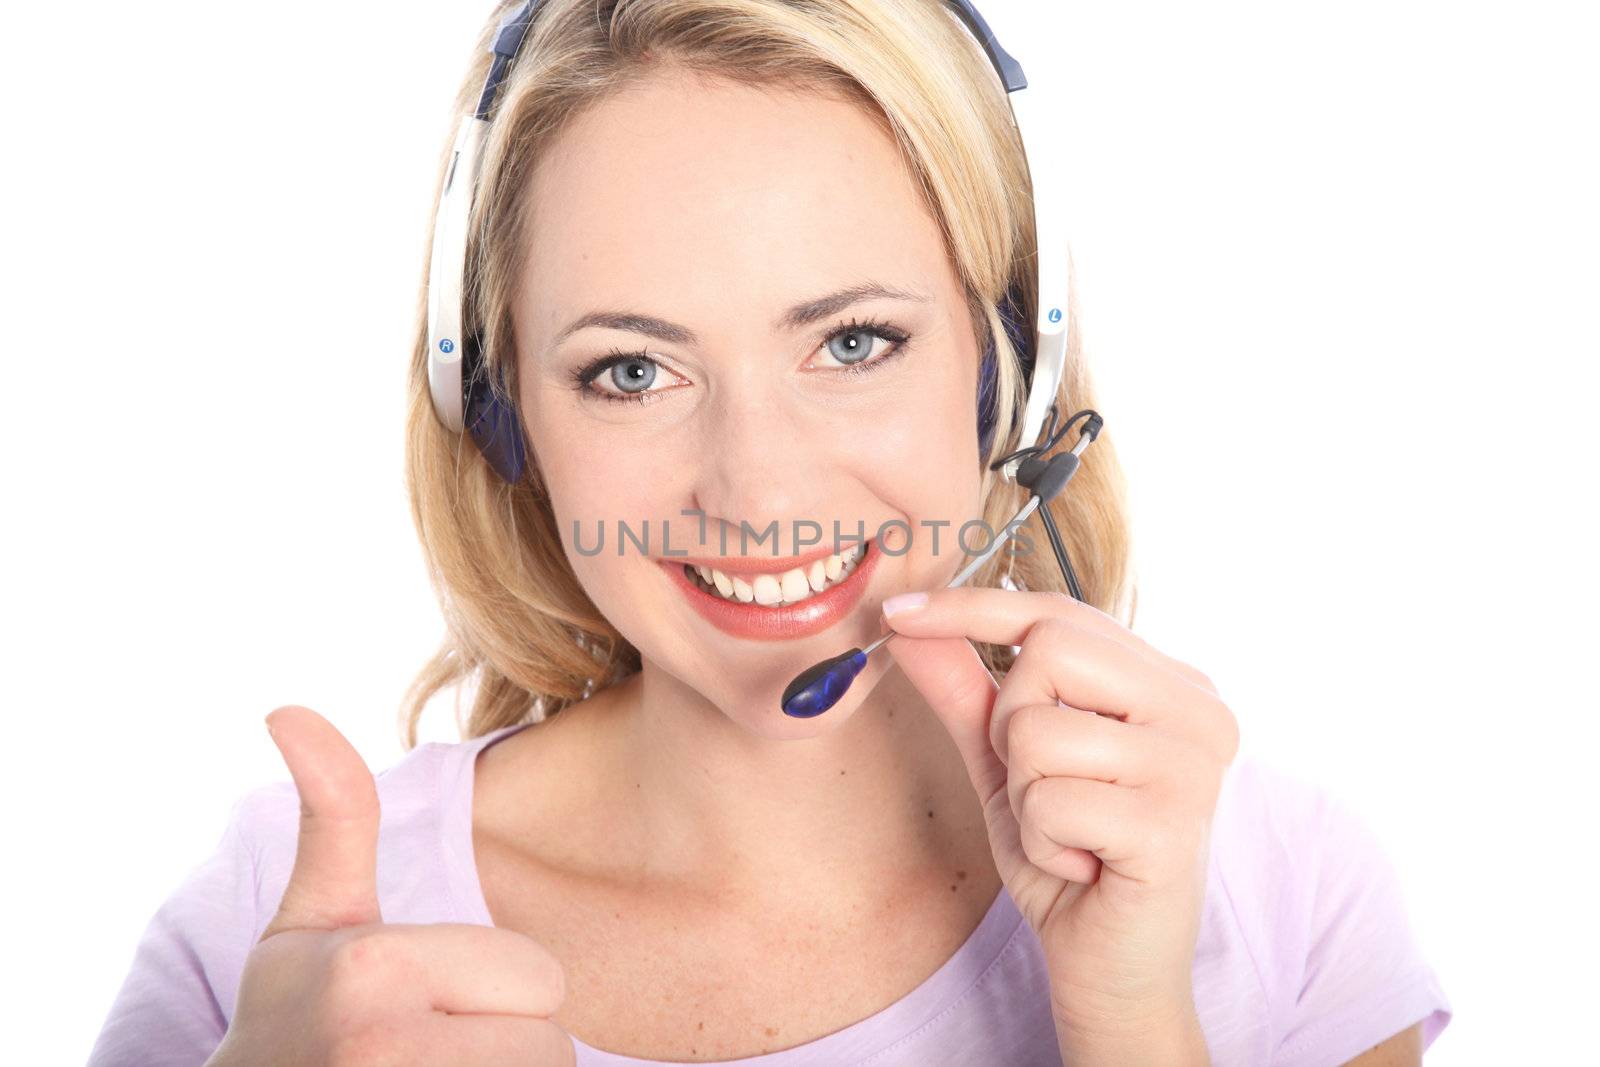 Smiling beautiful young receptionist, call centre operator or secretary wearing a headset and microphone giving a thumbs up gesture isolated on white